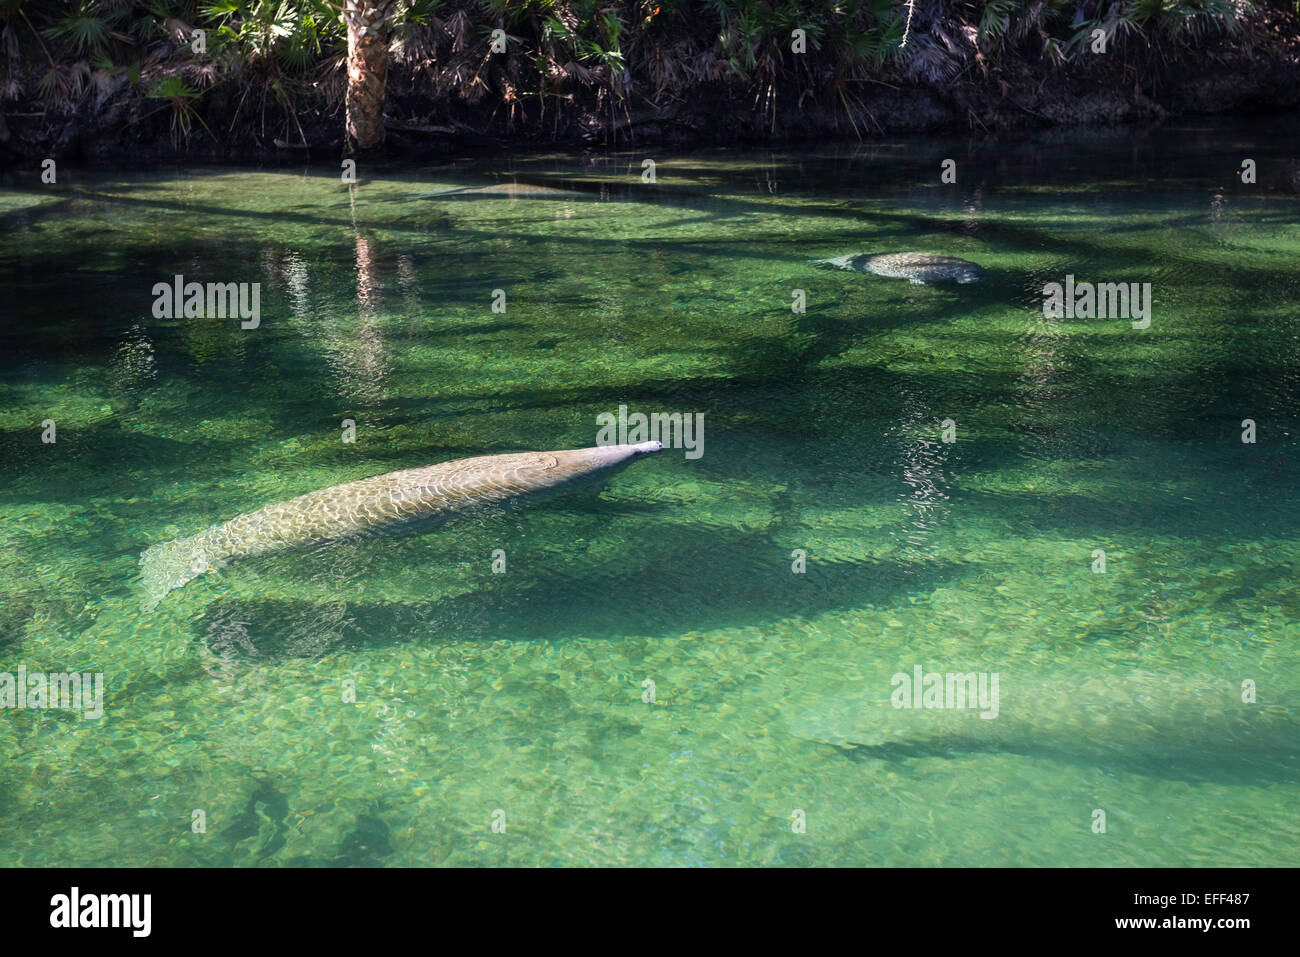 Wild Florida manatee surfacing to take a breath in the warm clear water of Blue Spring State Park, Florida, winter. Stock Photo